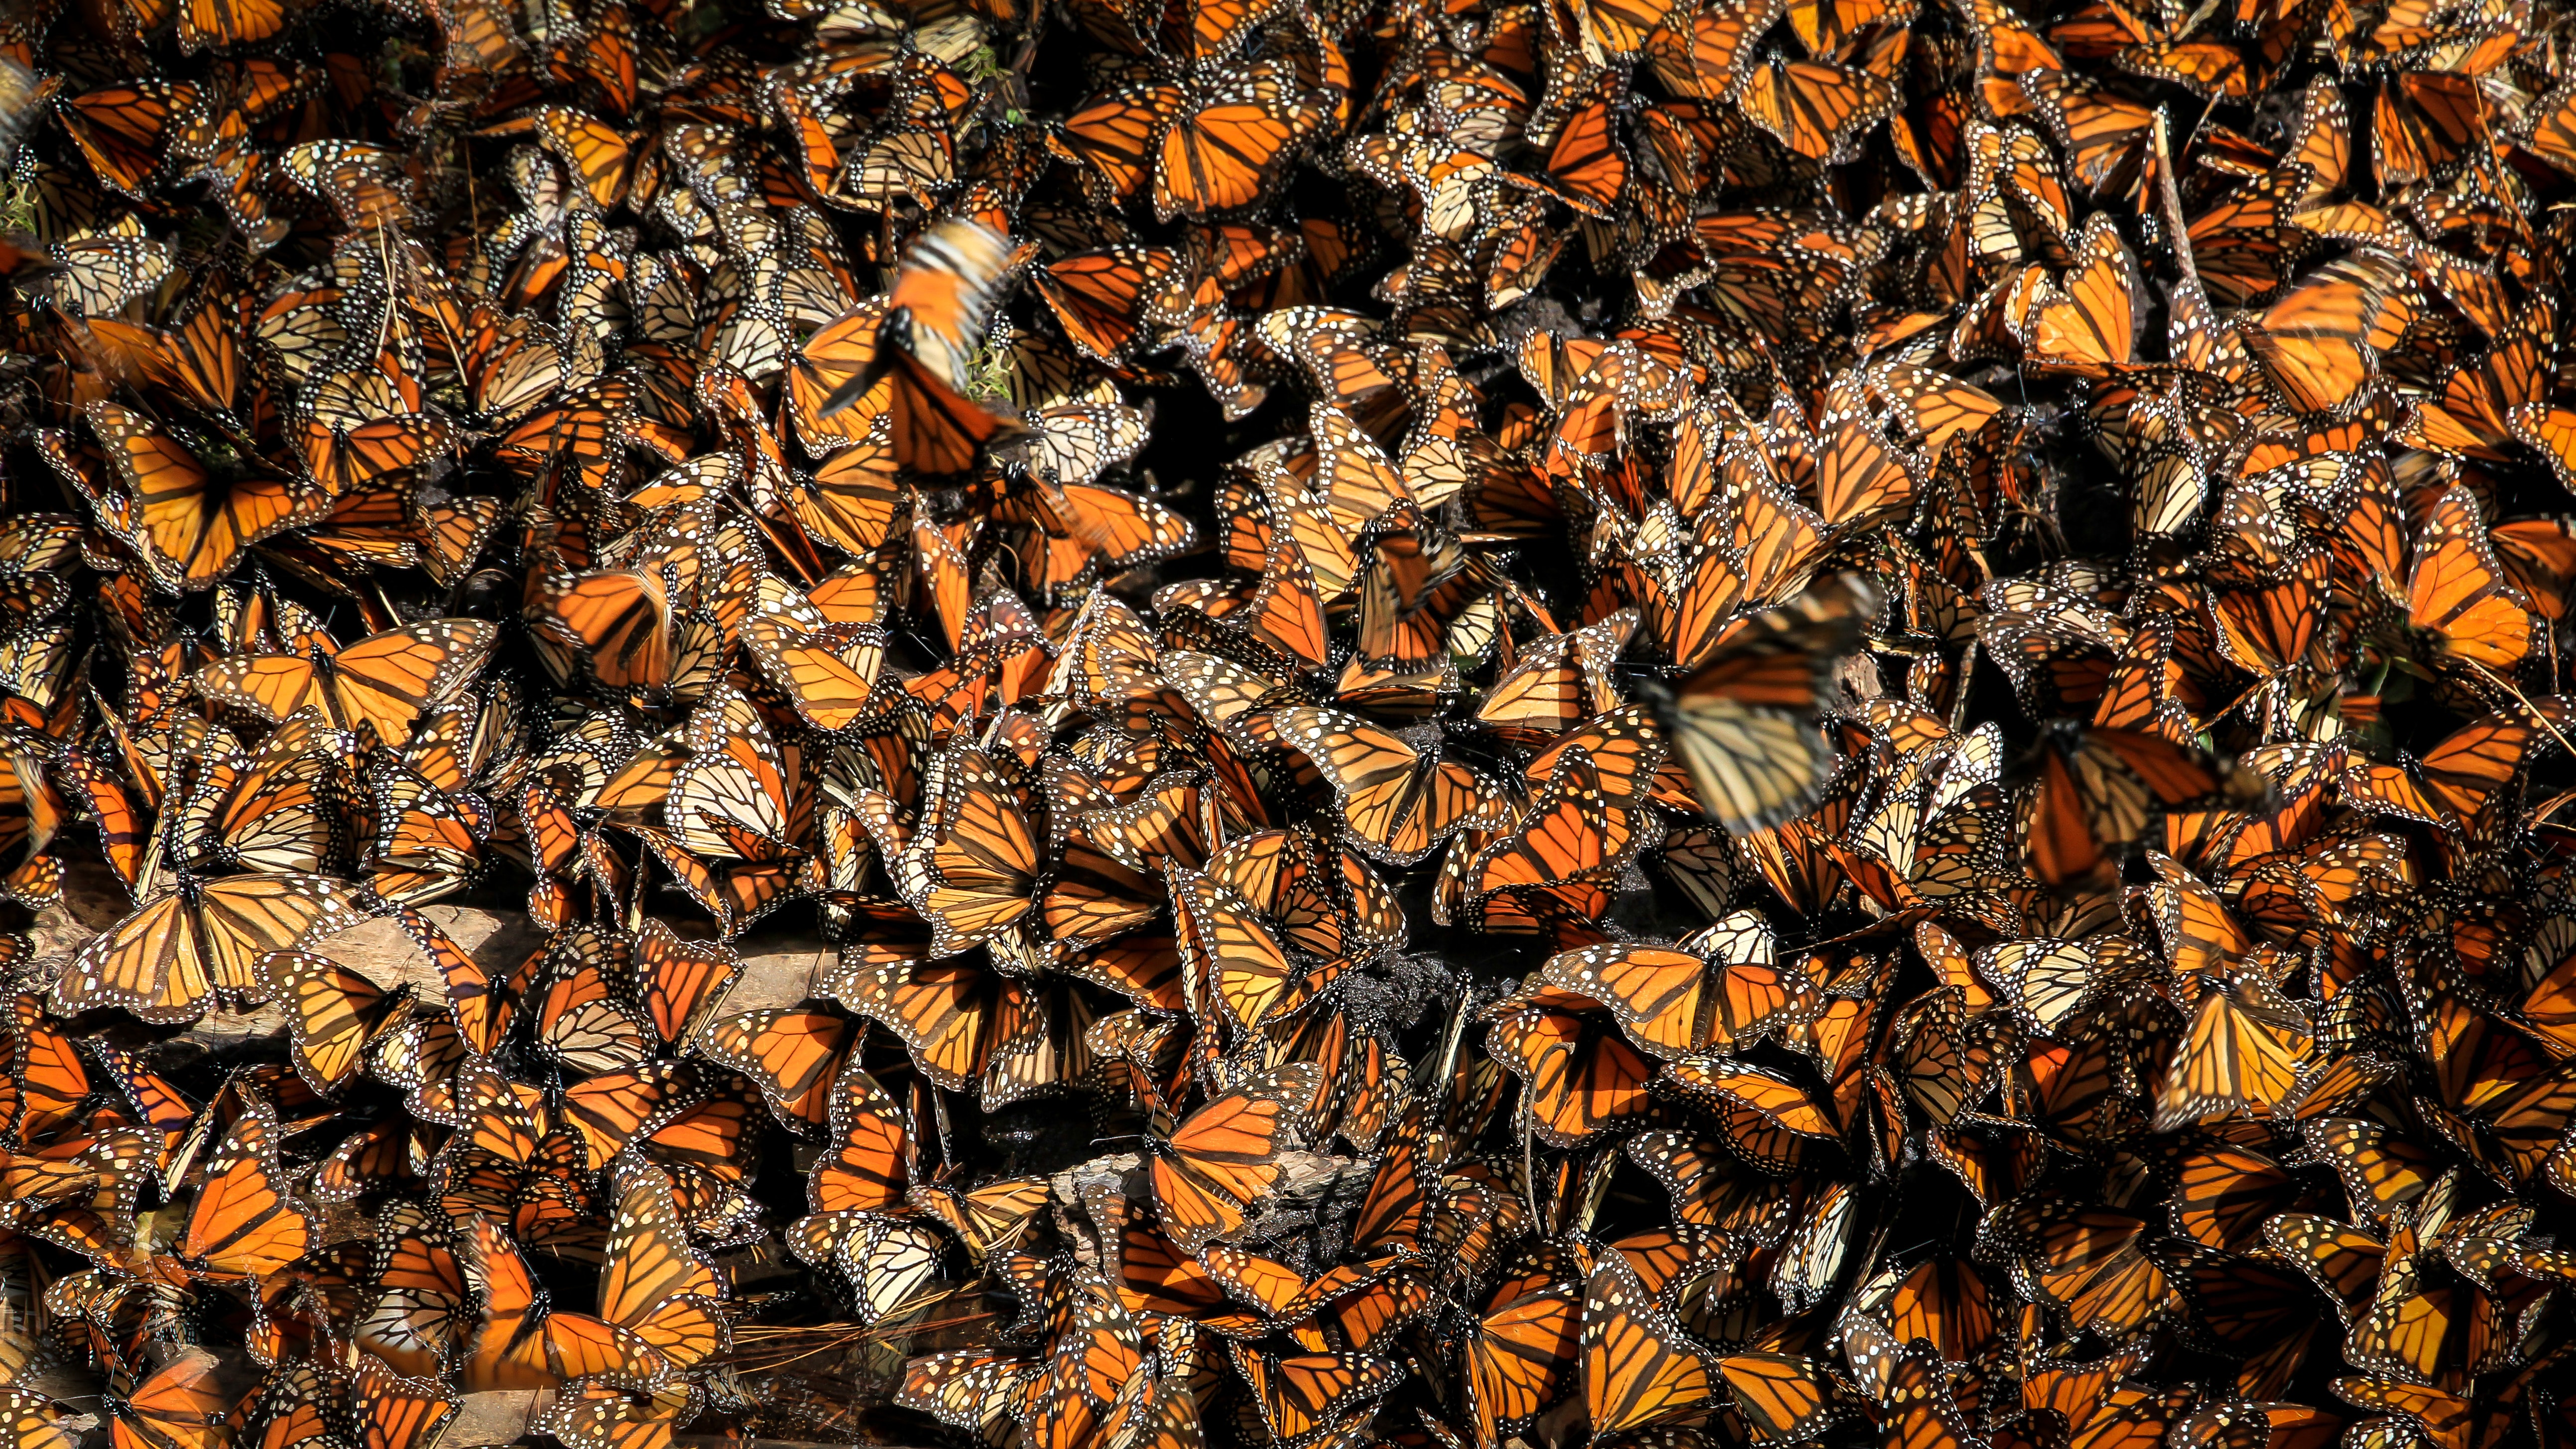 A crowd of monarch butterflies at their mating site in Michoacán, Mexico